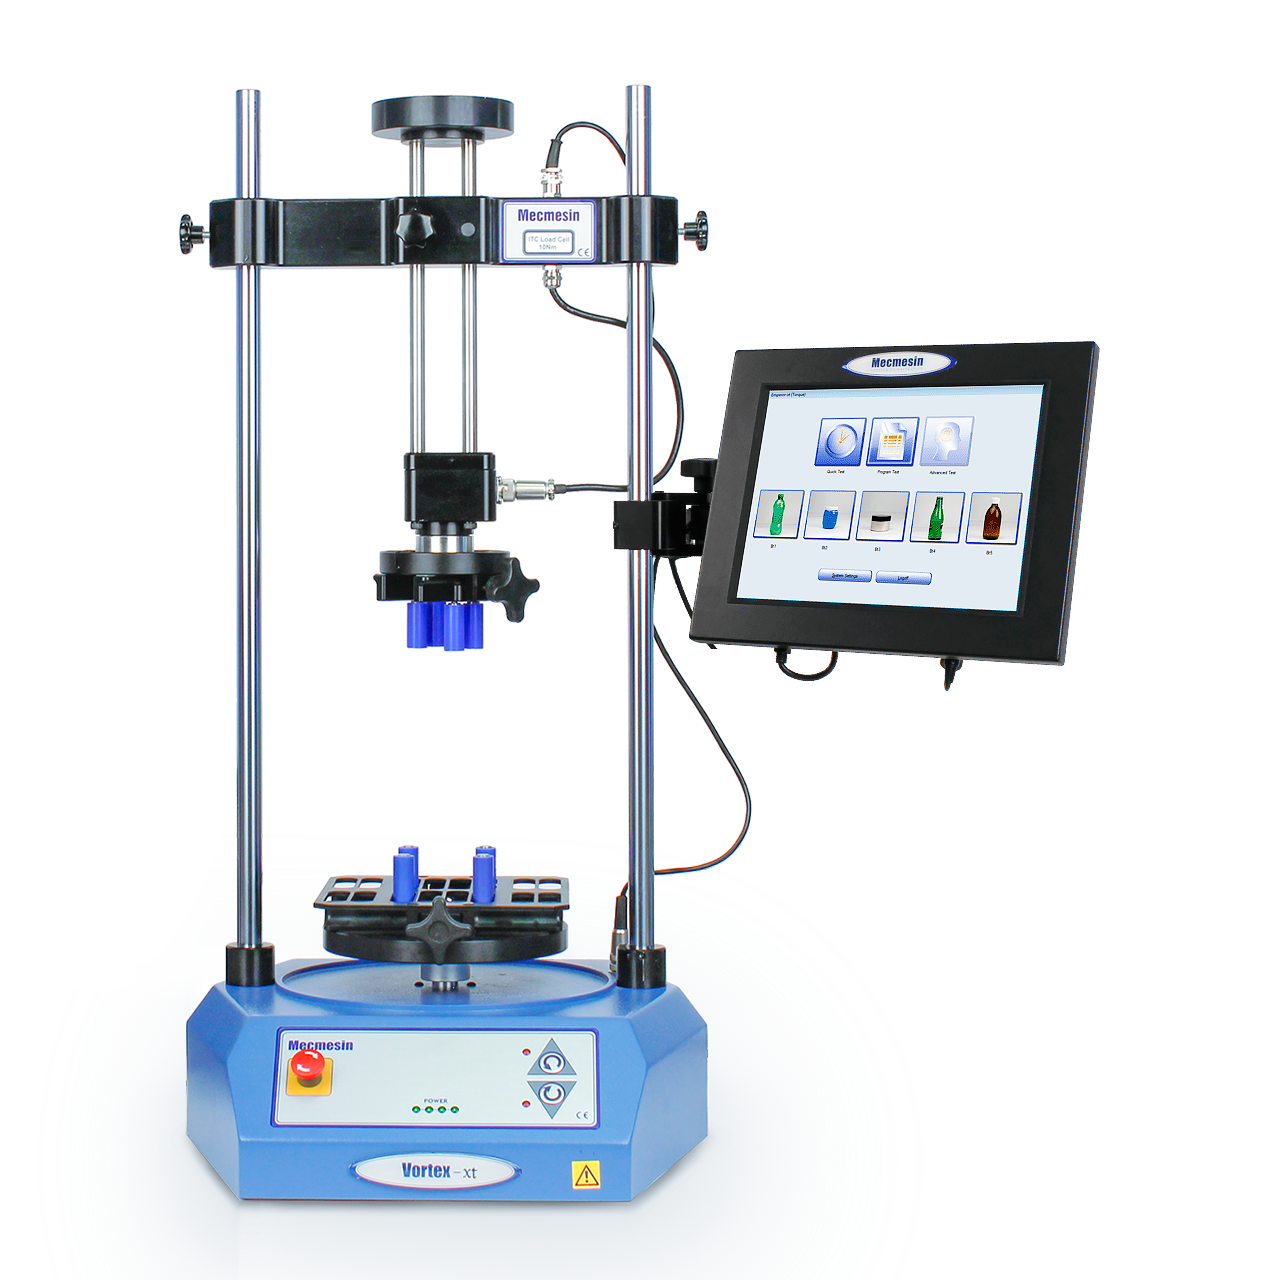 Mecmesin Vortex-xt advanced torque and closure tester with touchscreen console